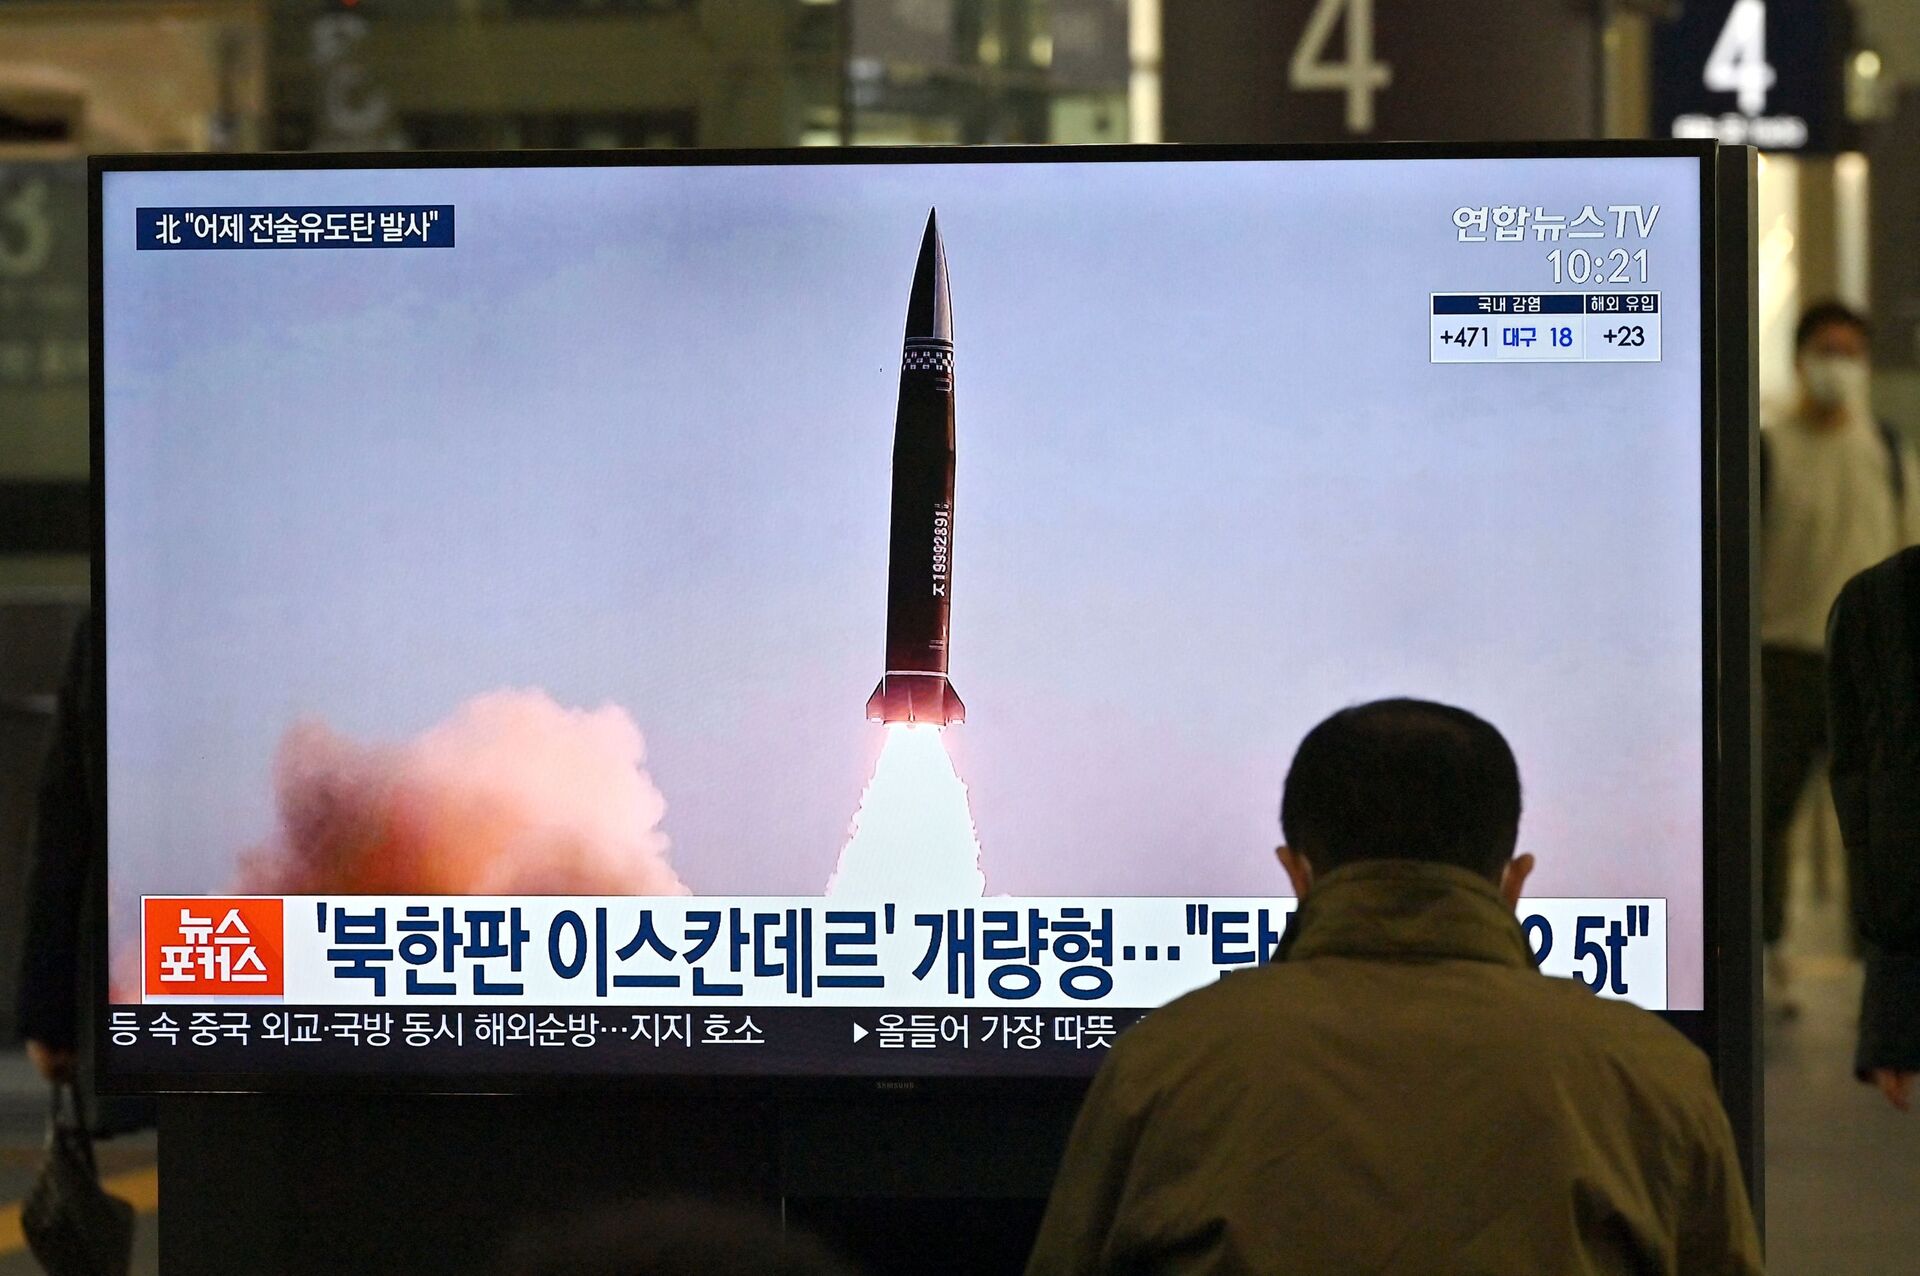 A man watches a television screen at Suseo railway station in Seoul on March 26, 2021, showing news footage of North Korea's latest tactical guided projectile test.  - Sputnik International, 1920, 04.11.2022